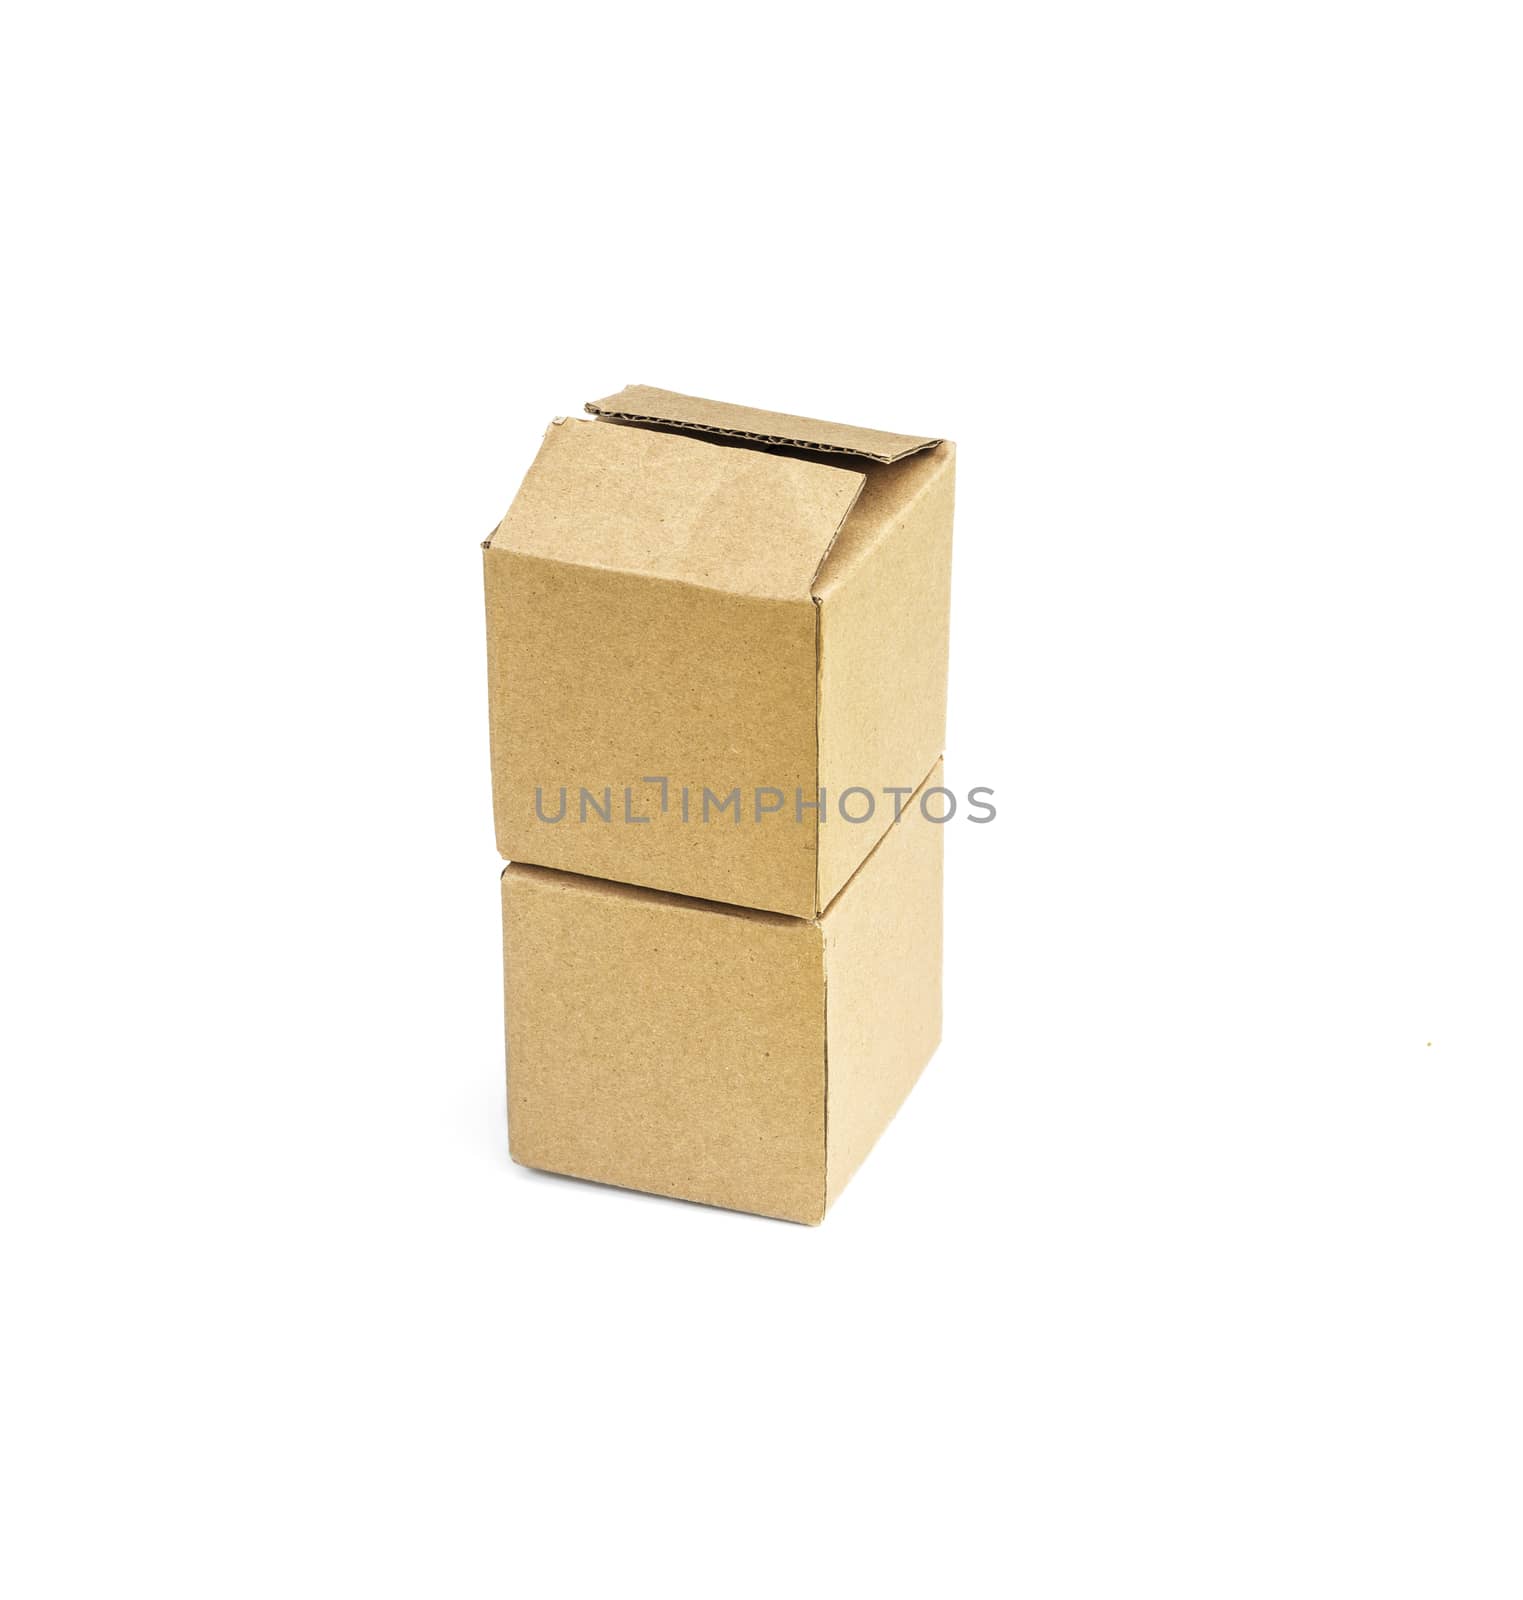 Two square cardboard boxes stand one on top of another on a white background